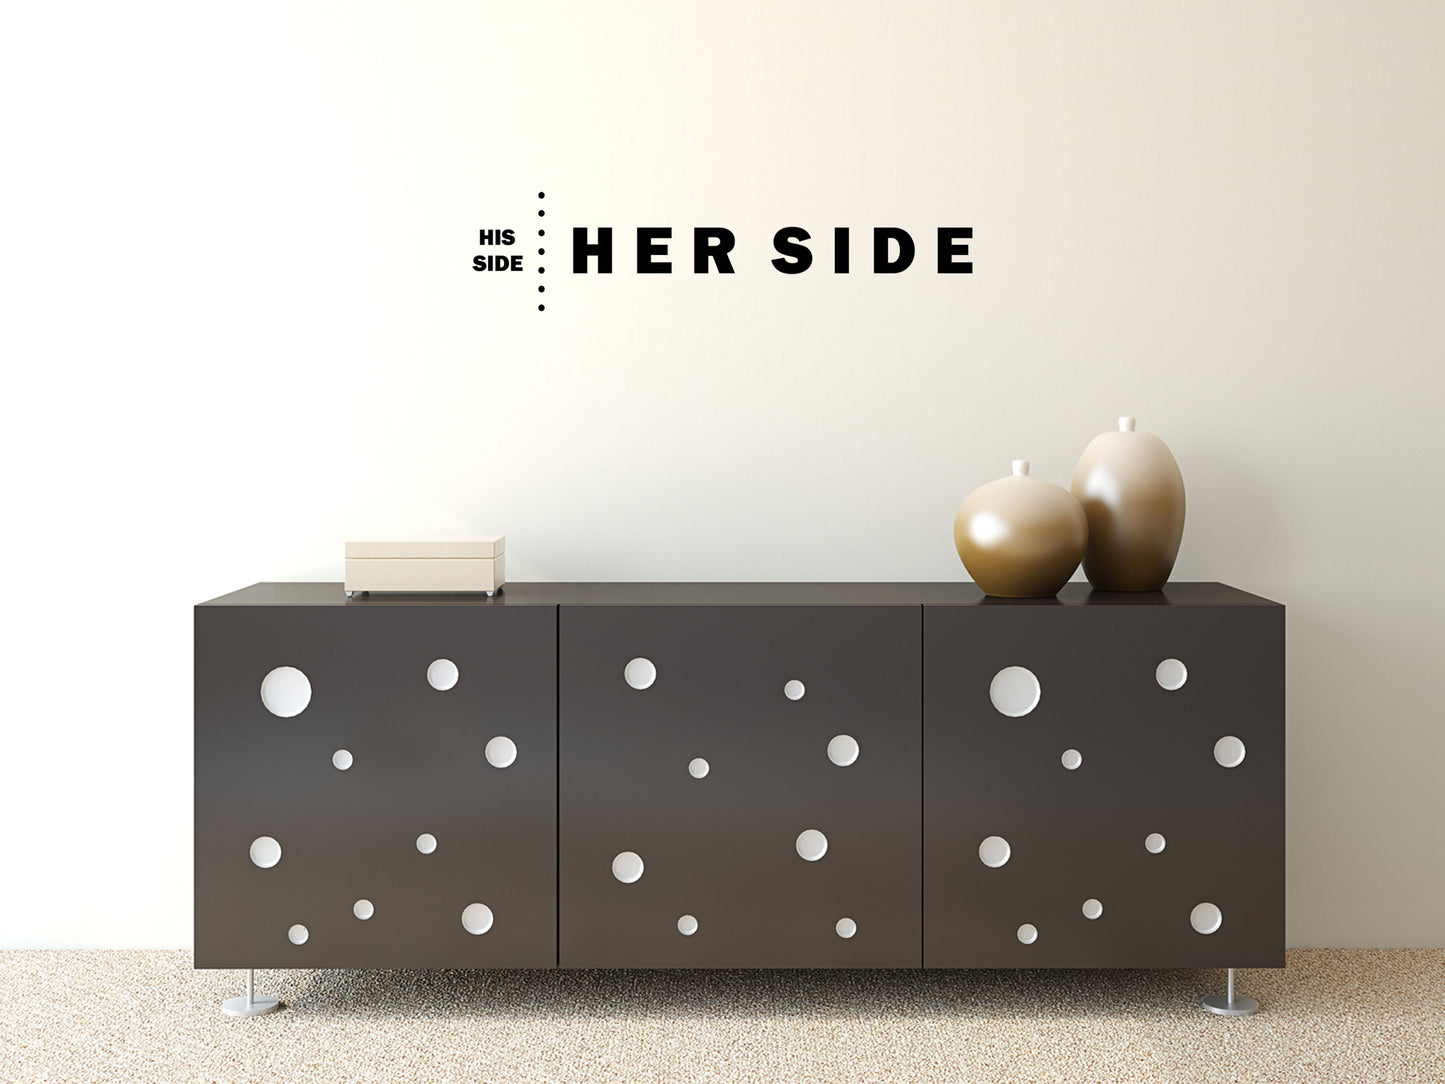 His Side Her Side Vinyl Wall Decal Inspirational Wall Signs 